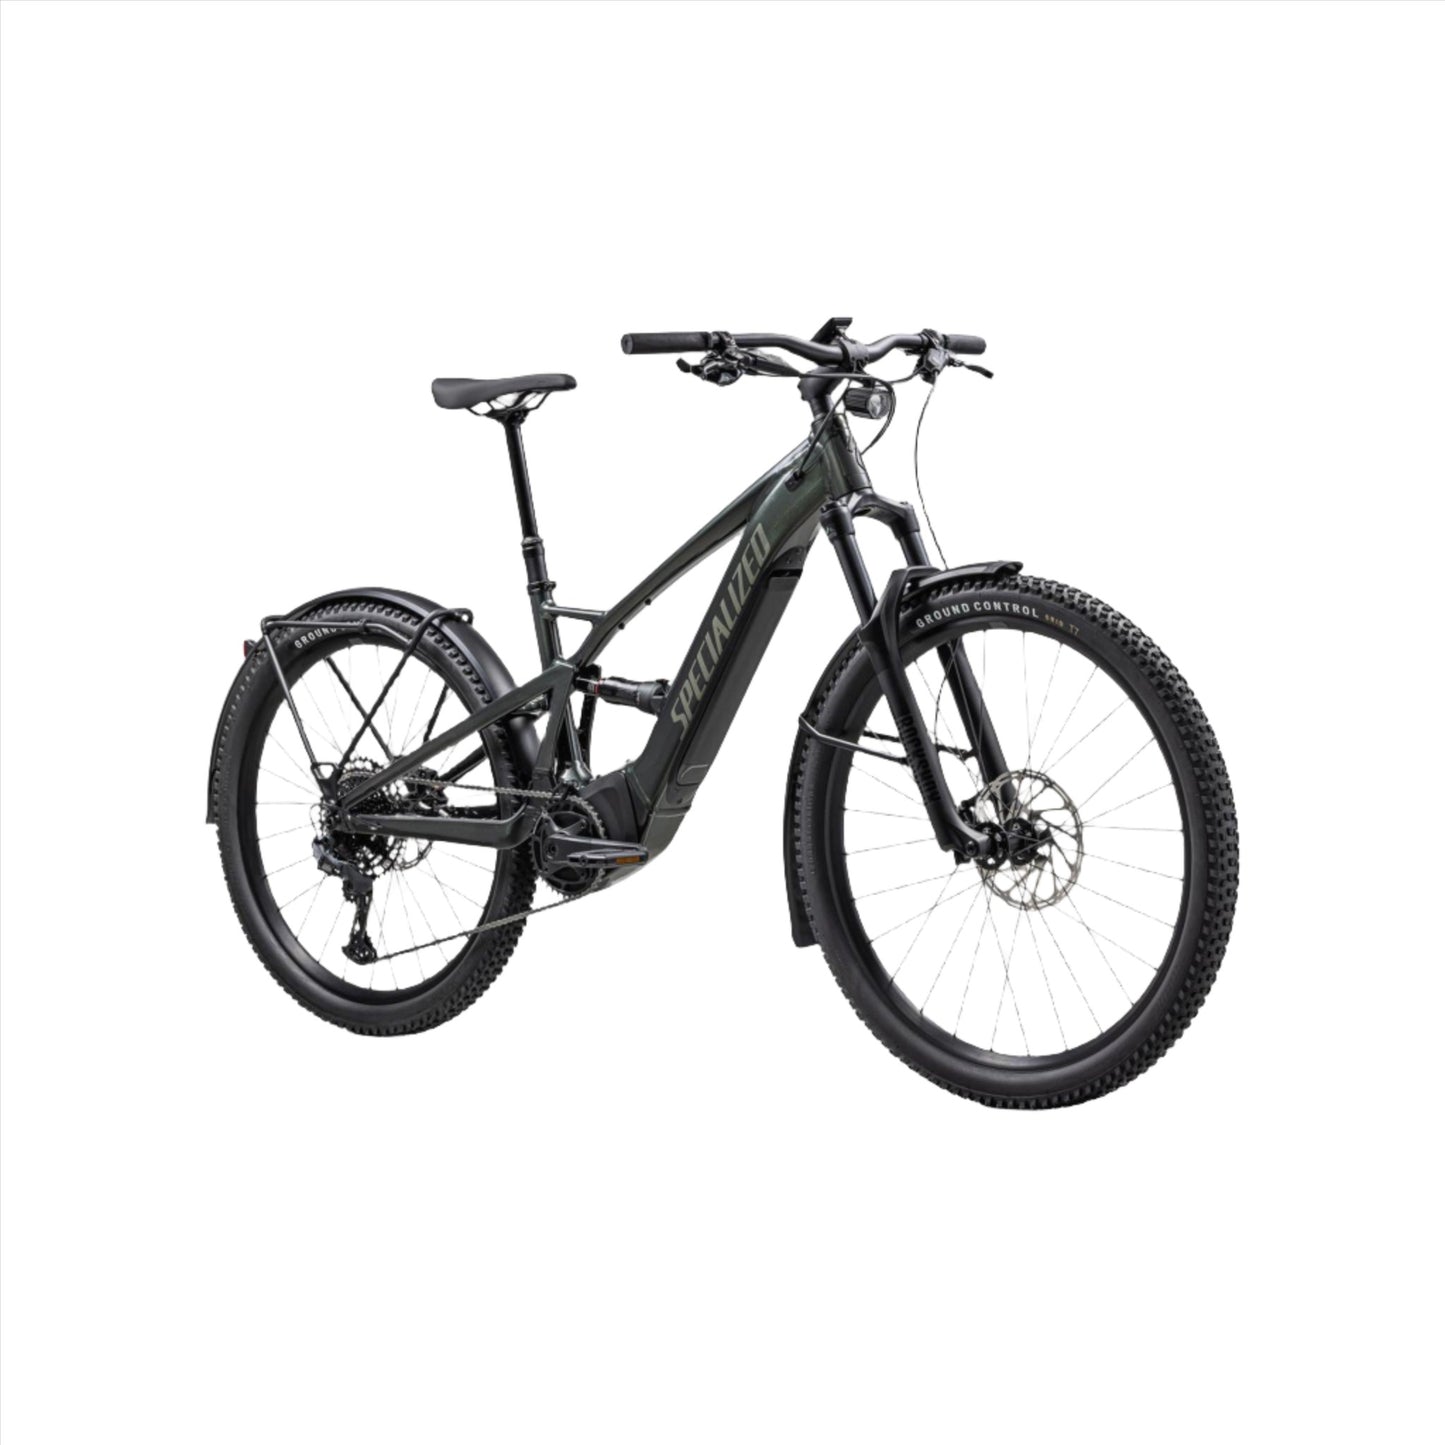 Turbo Tero X 5.0 | Complete Cyclist - The Turbo Tero X means one thing: you're going to need a bigger map. With ride anywhere range, this full-suspension electric bike is our go-anywhere, over